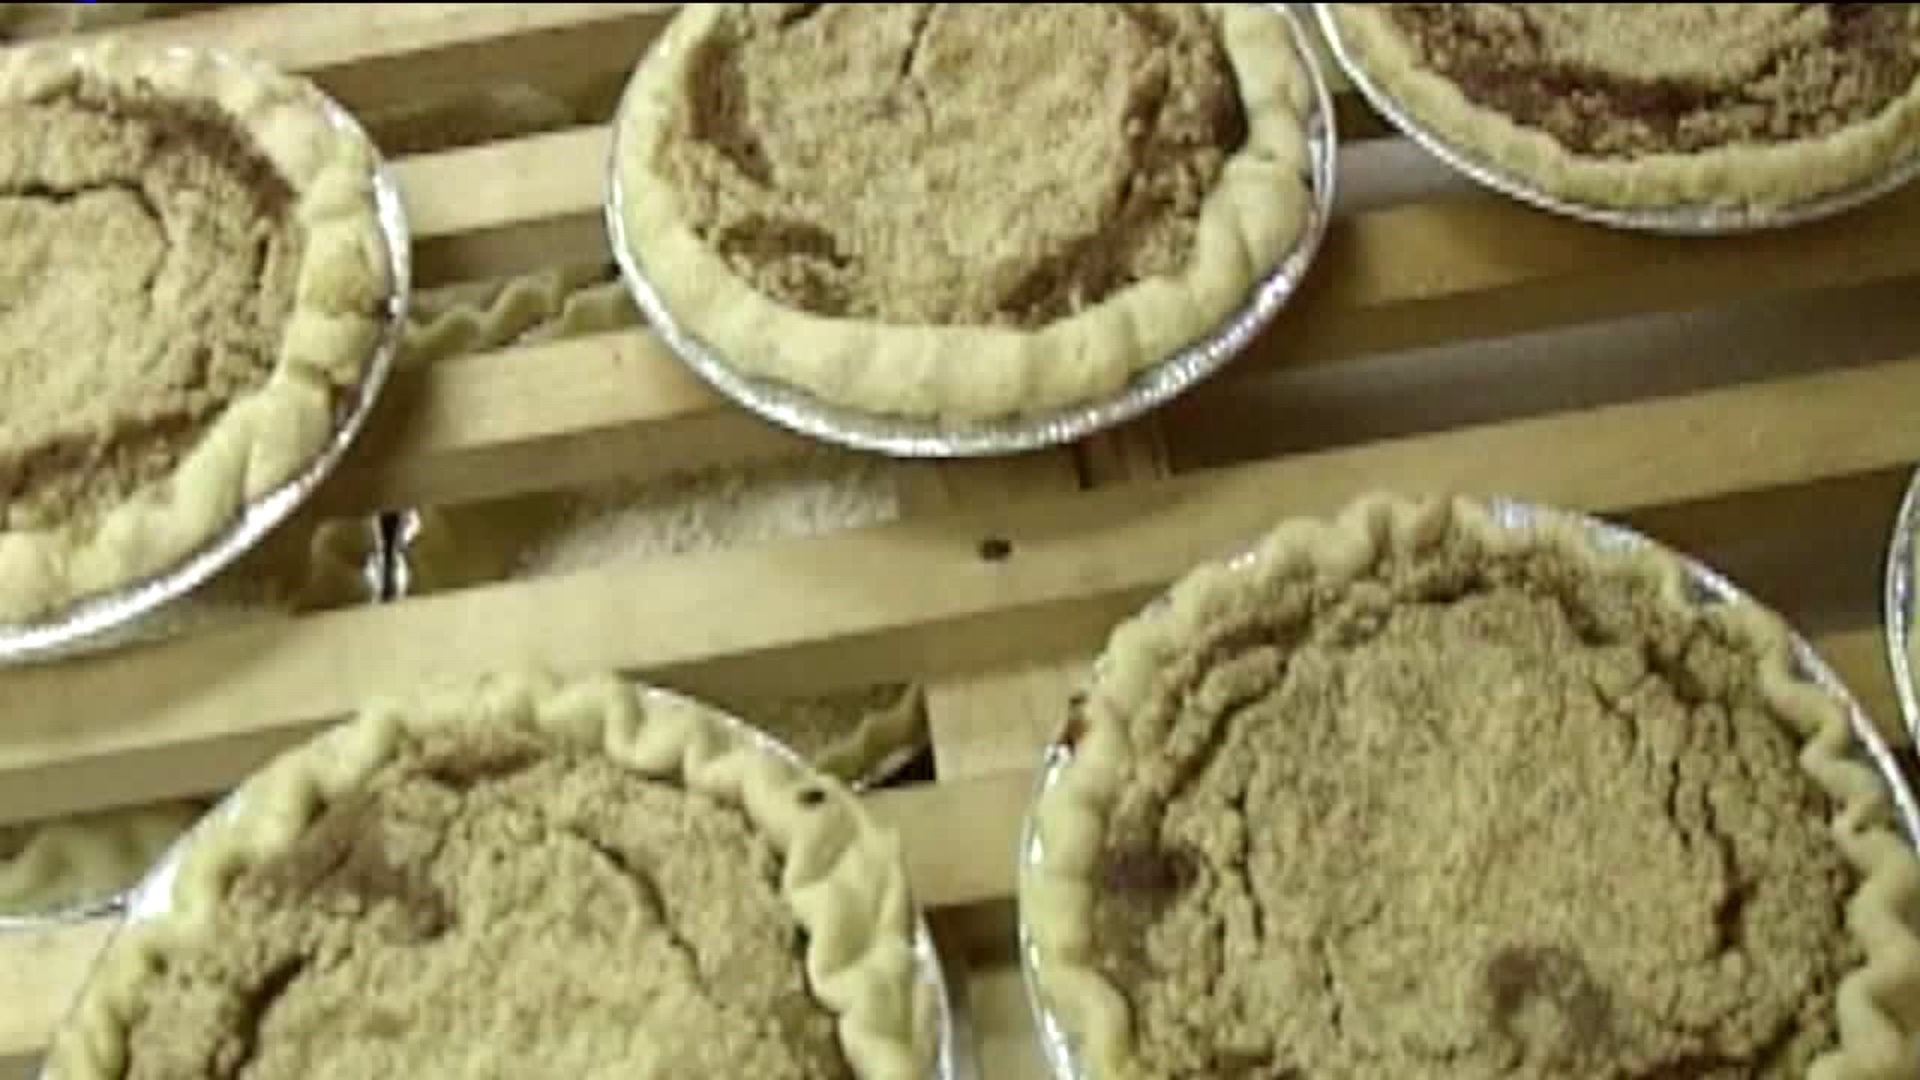 Back Down The Pennsylvania Road: Shoo-Fly Pie